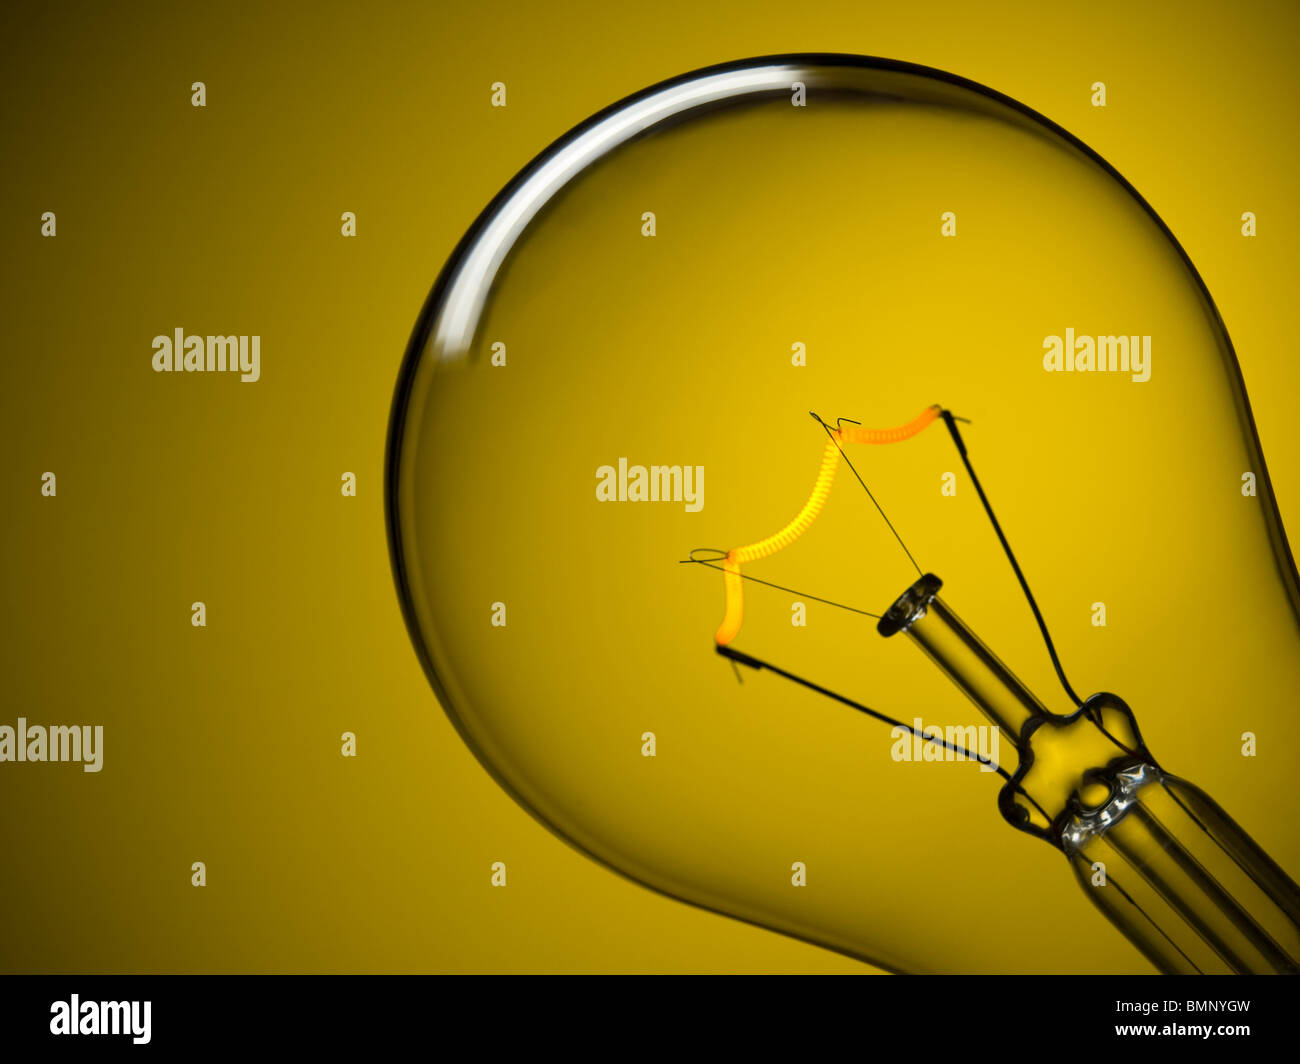 Close up on a turned on light bulb over a yellow background. Stock Photo